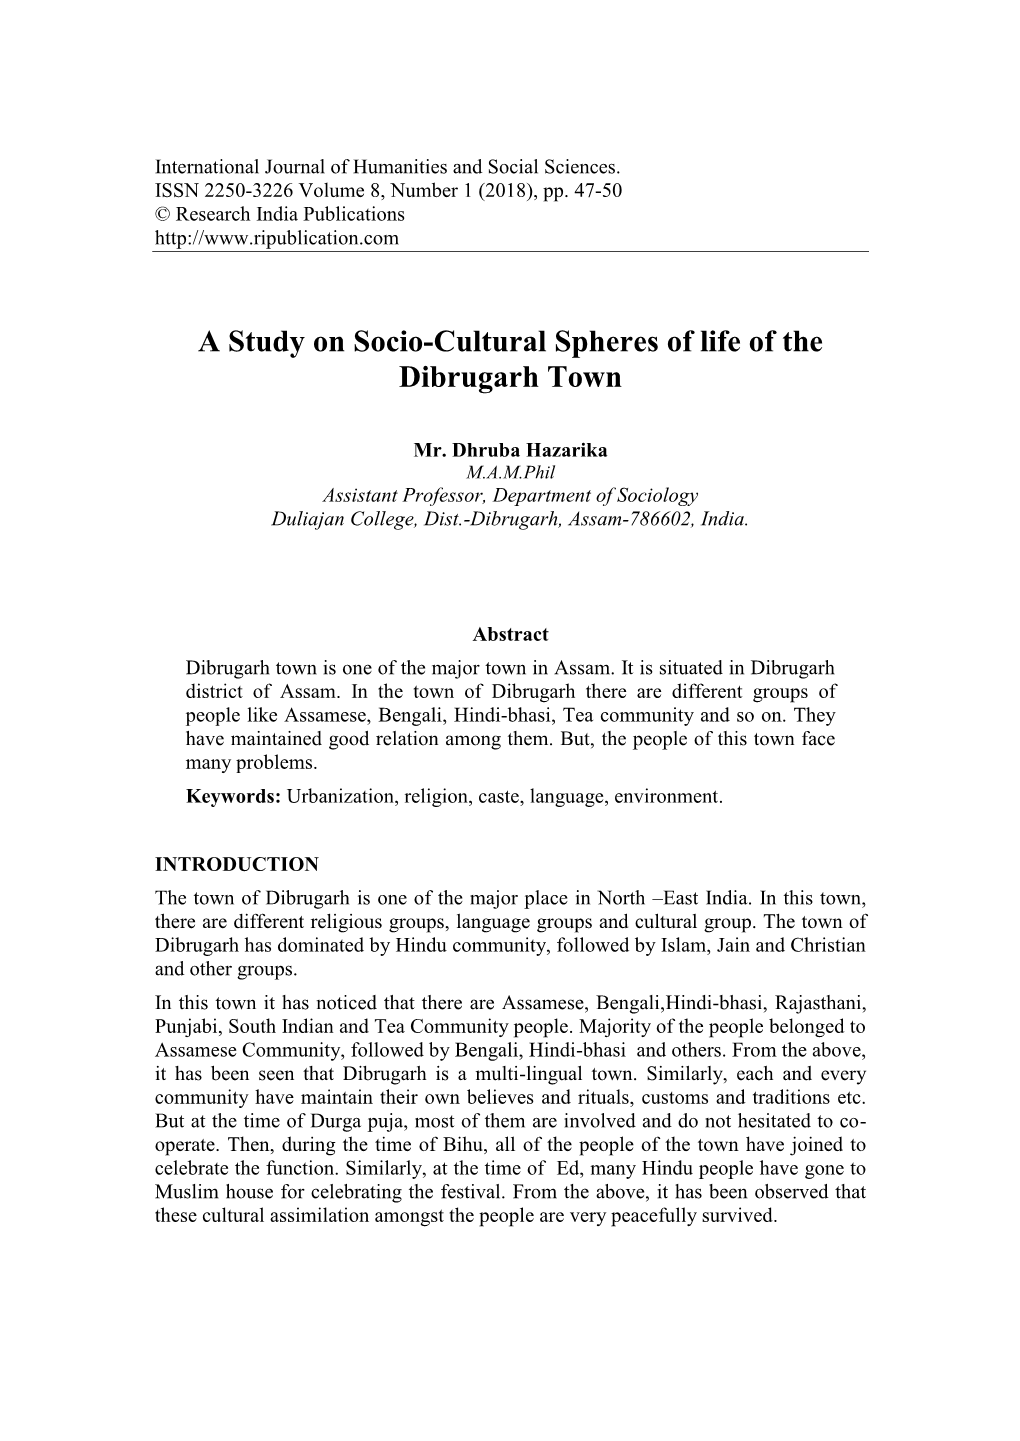 A Study on Socio-Cultural Spheres of Life of the Dibrugarh Town